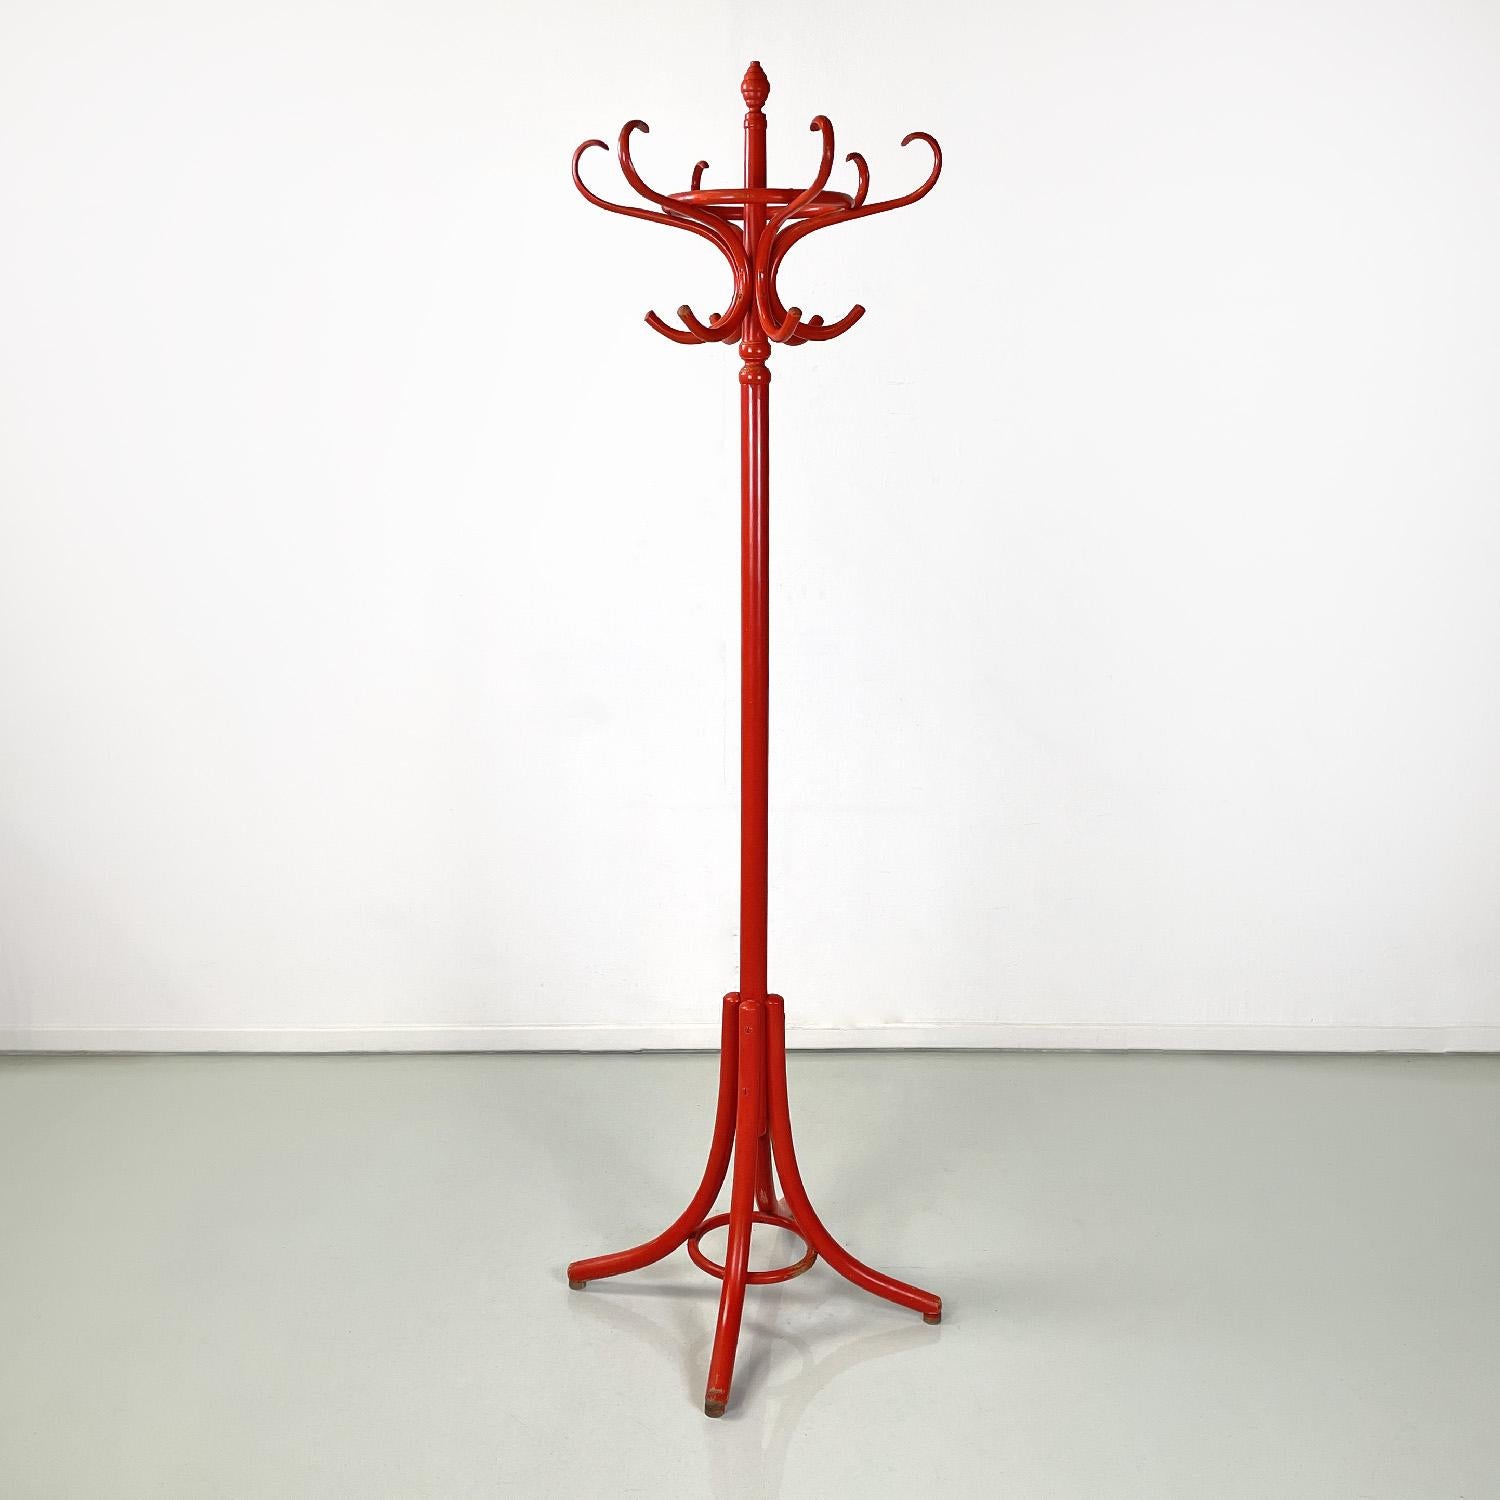 Italian modern red wooden floor coat hanger, 1970s
Floor coat hanger in red lacquered wood. It has a central knob and six coat hooks which have a 